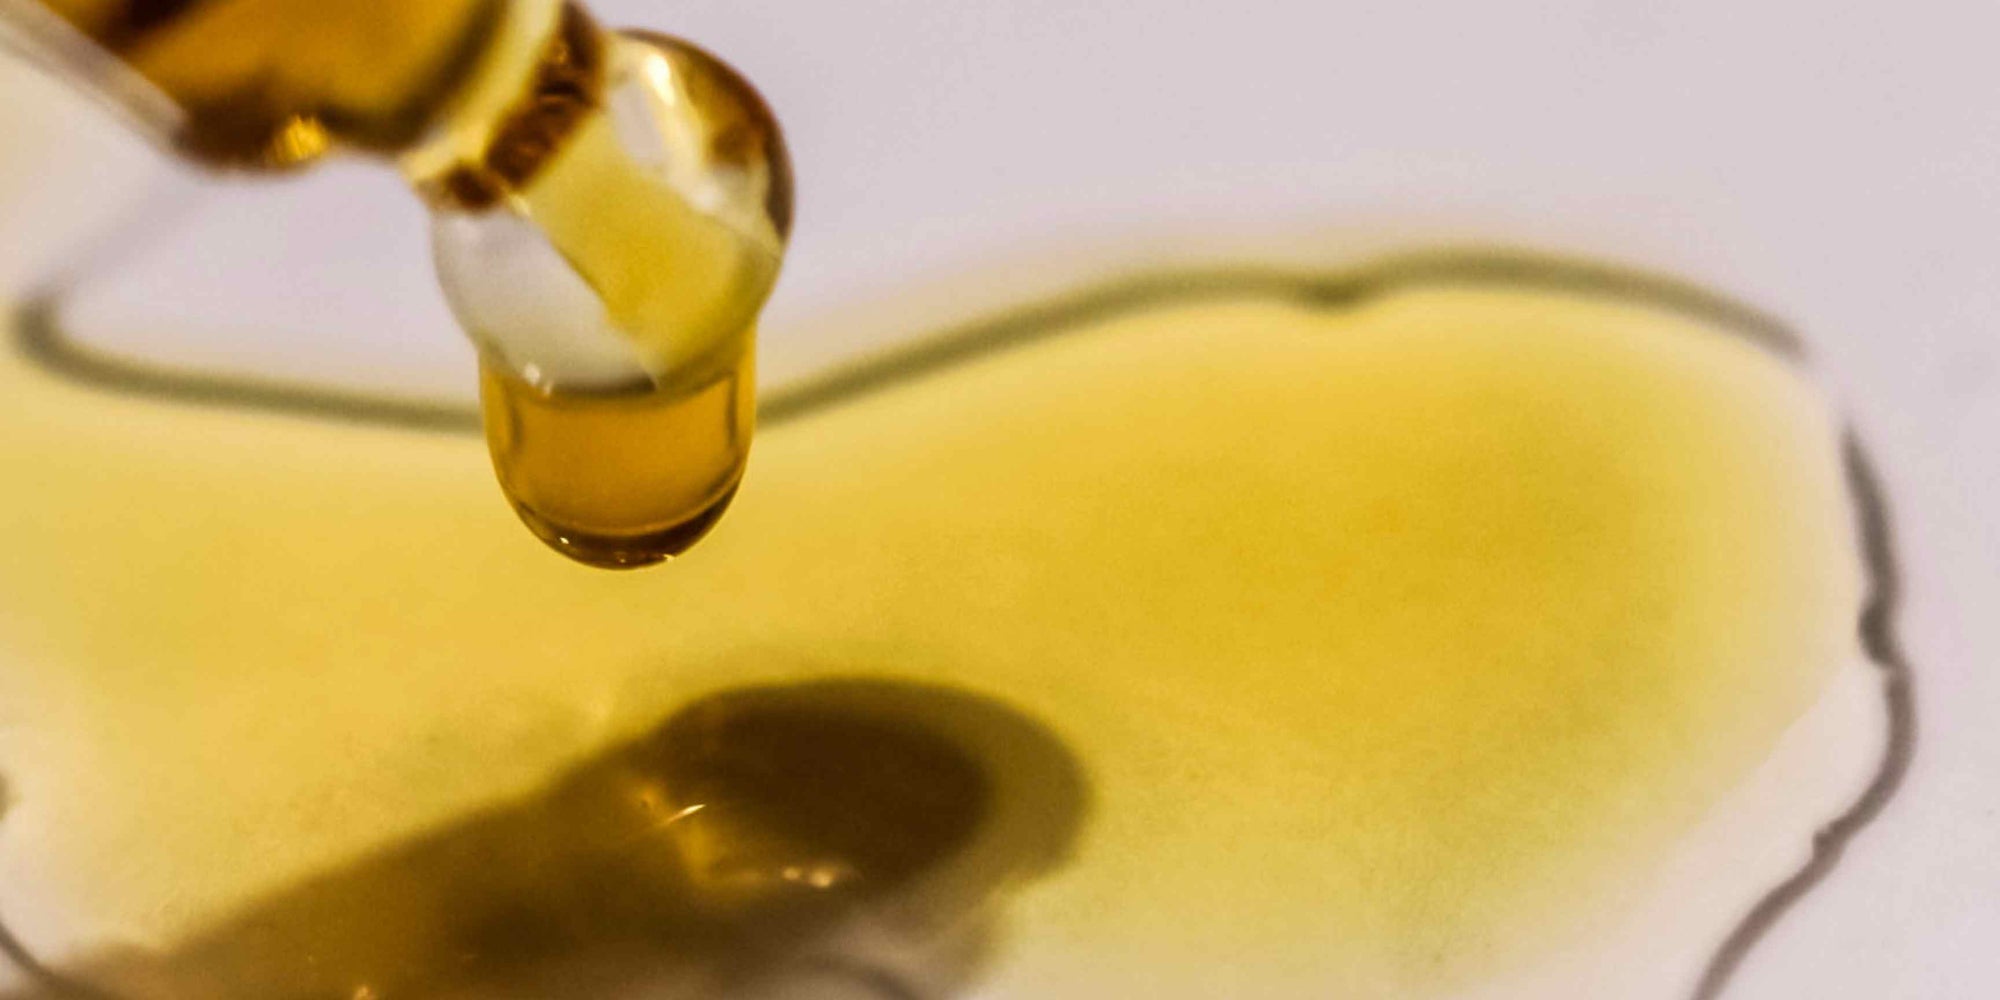 Find out more about linoleic acid and its benefit on sensitive skin.